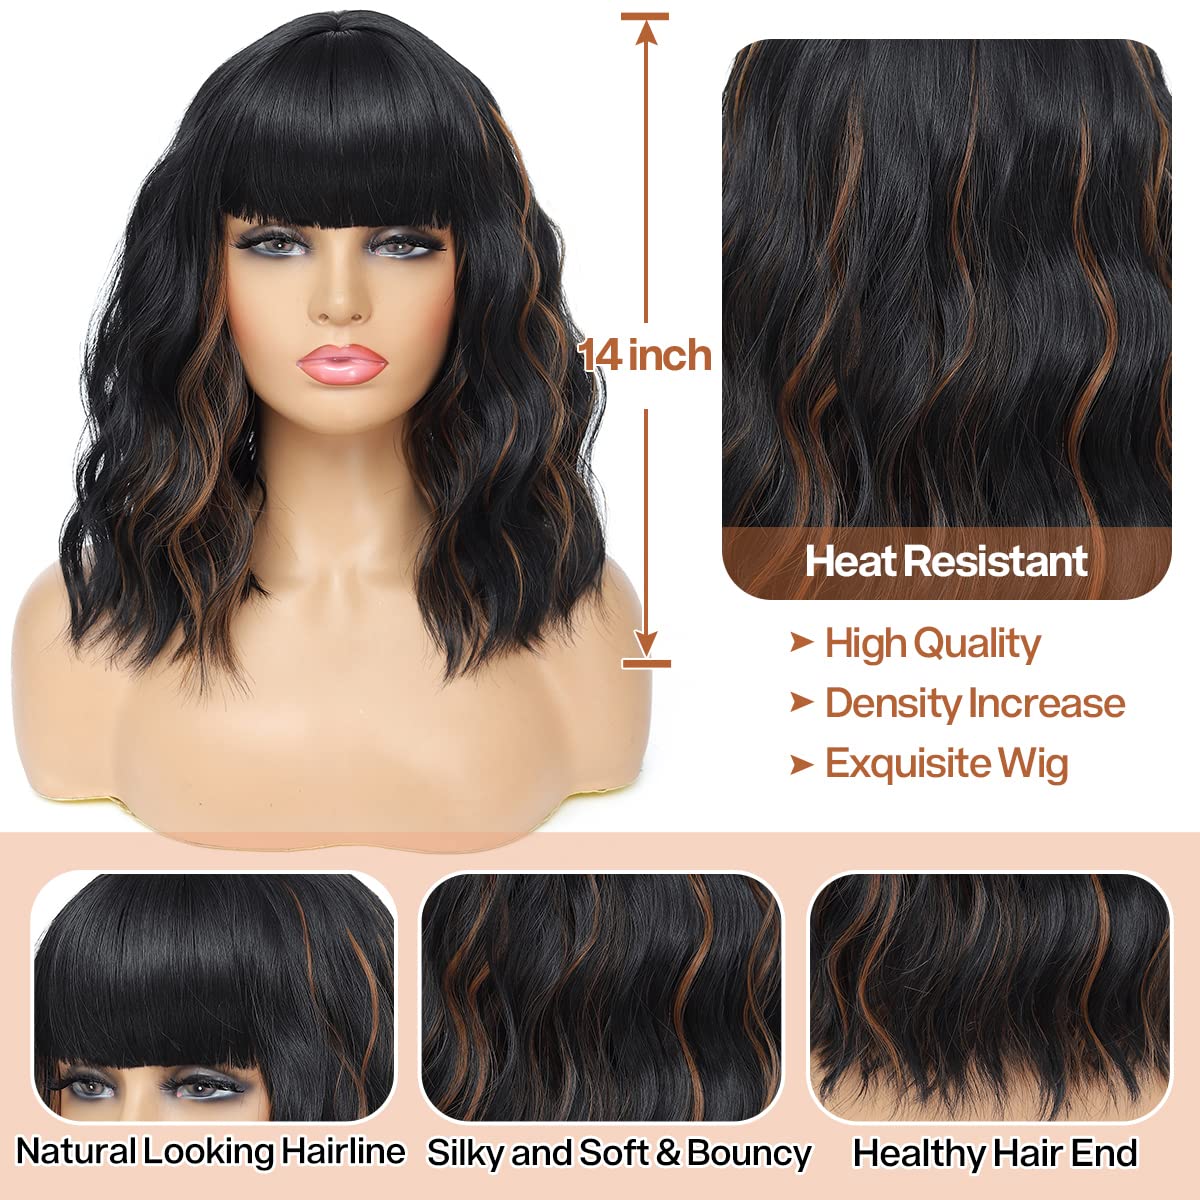 Short Wavy Wig with Bangs Black Mixed Brown Short Bob Wigs Shoulder Length Wear and Go Glueless Wigs Heat Resistant Fiber Synthetic Wig with Bangs